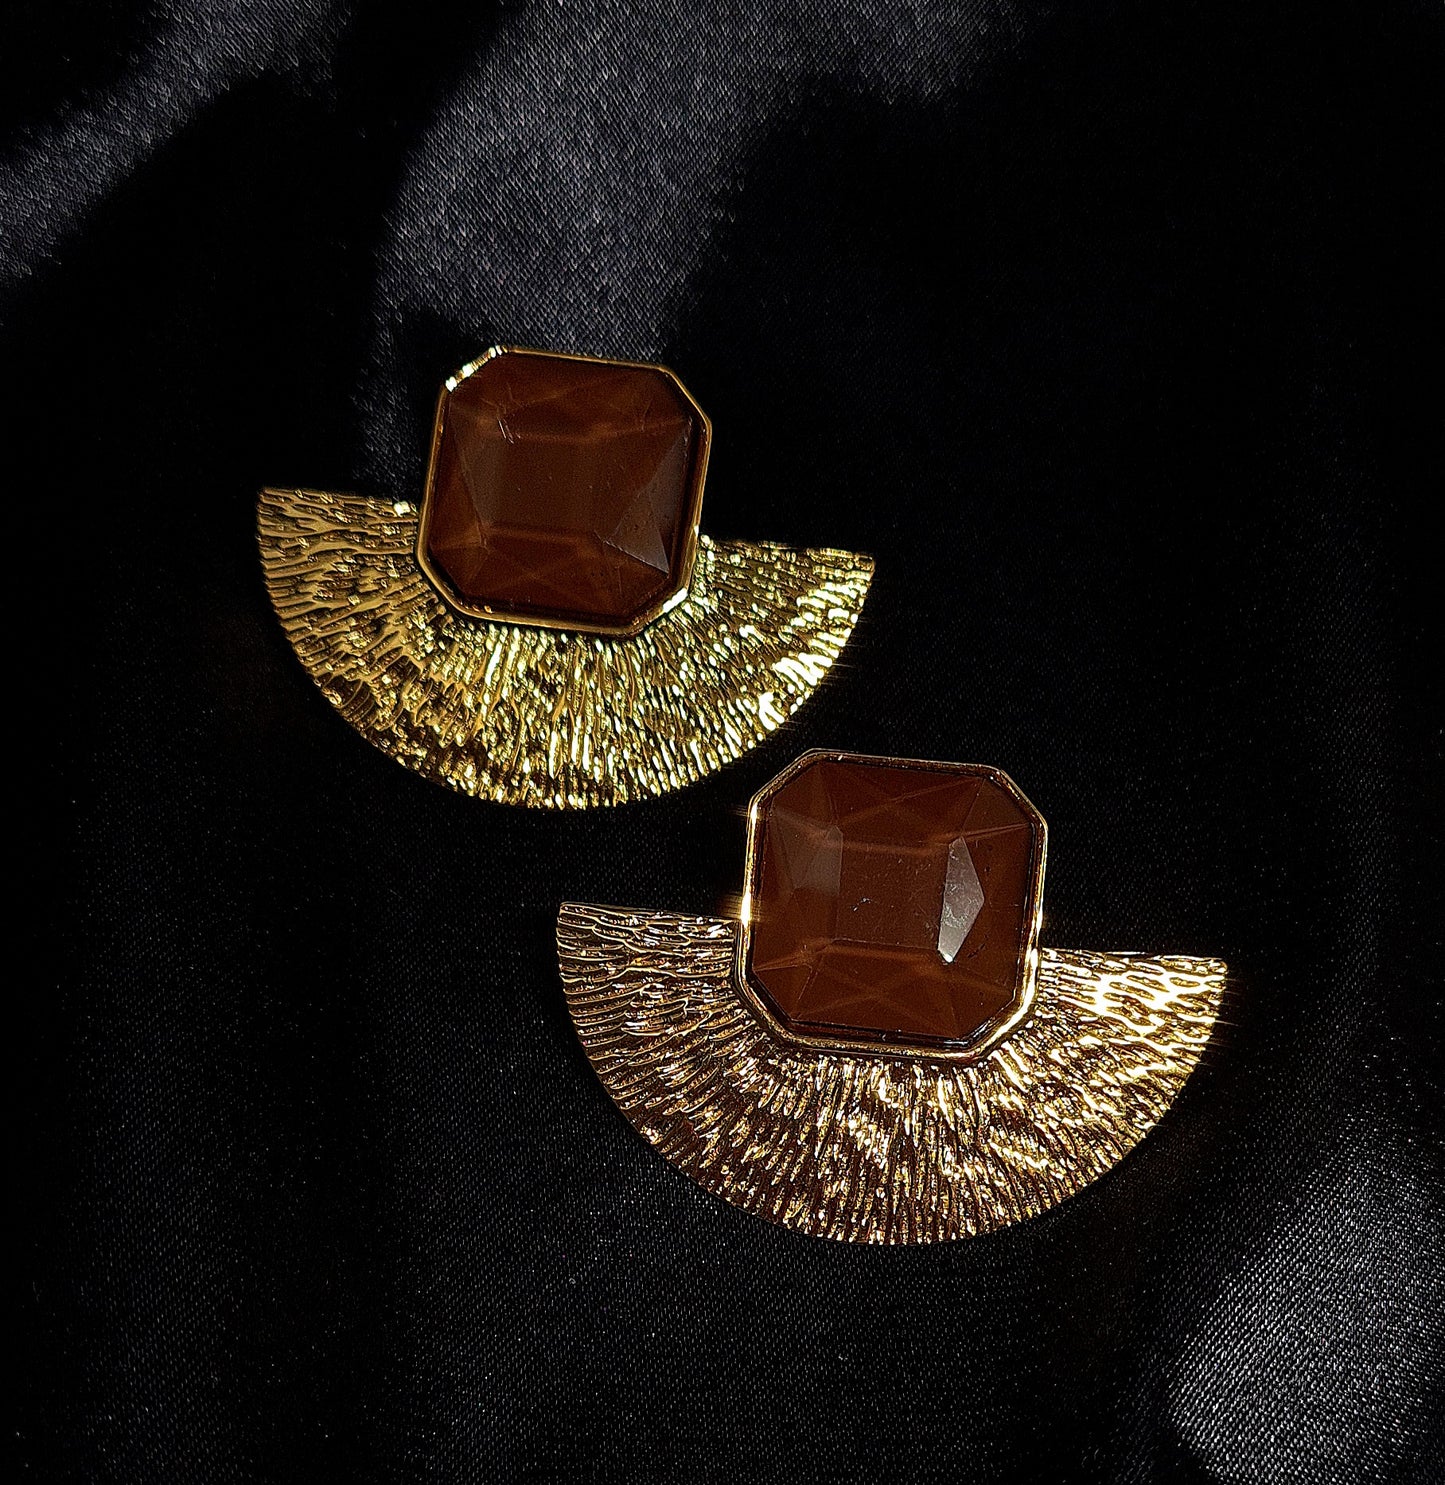 A pair of gold earrings with brown stones on a black surface. The earrings are fan-shaped with a delicate design. They are made of gold with brown stones in the center. The earrings are displayed on a black cloth.